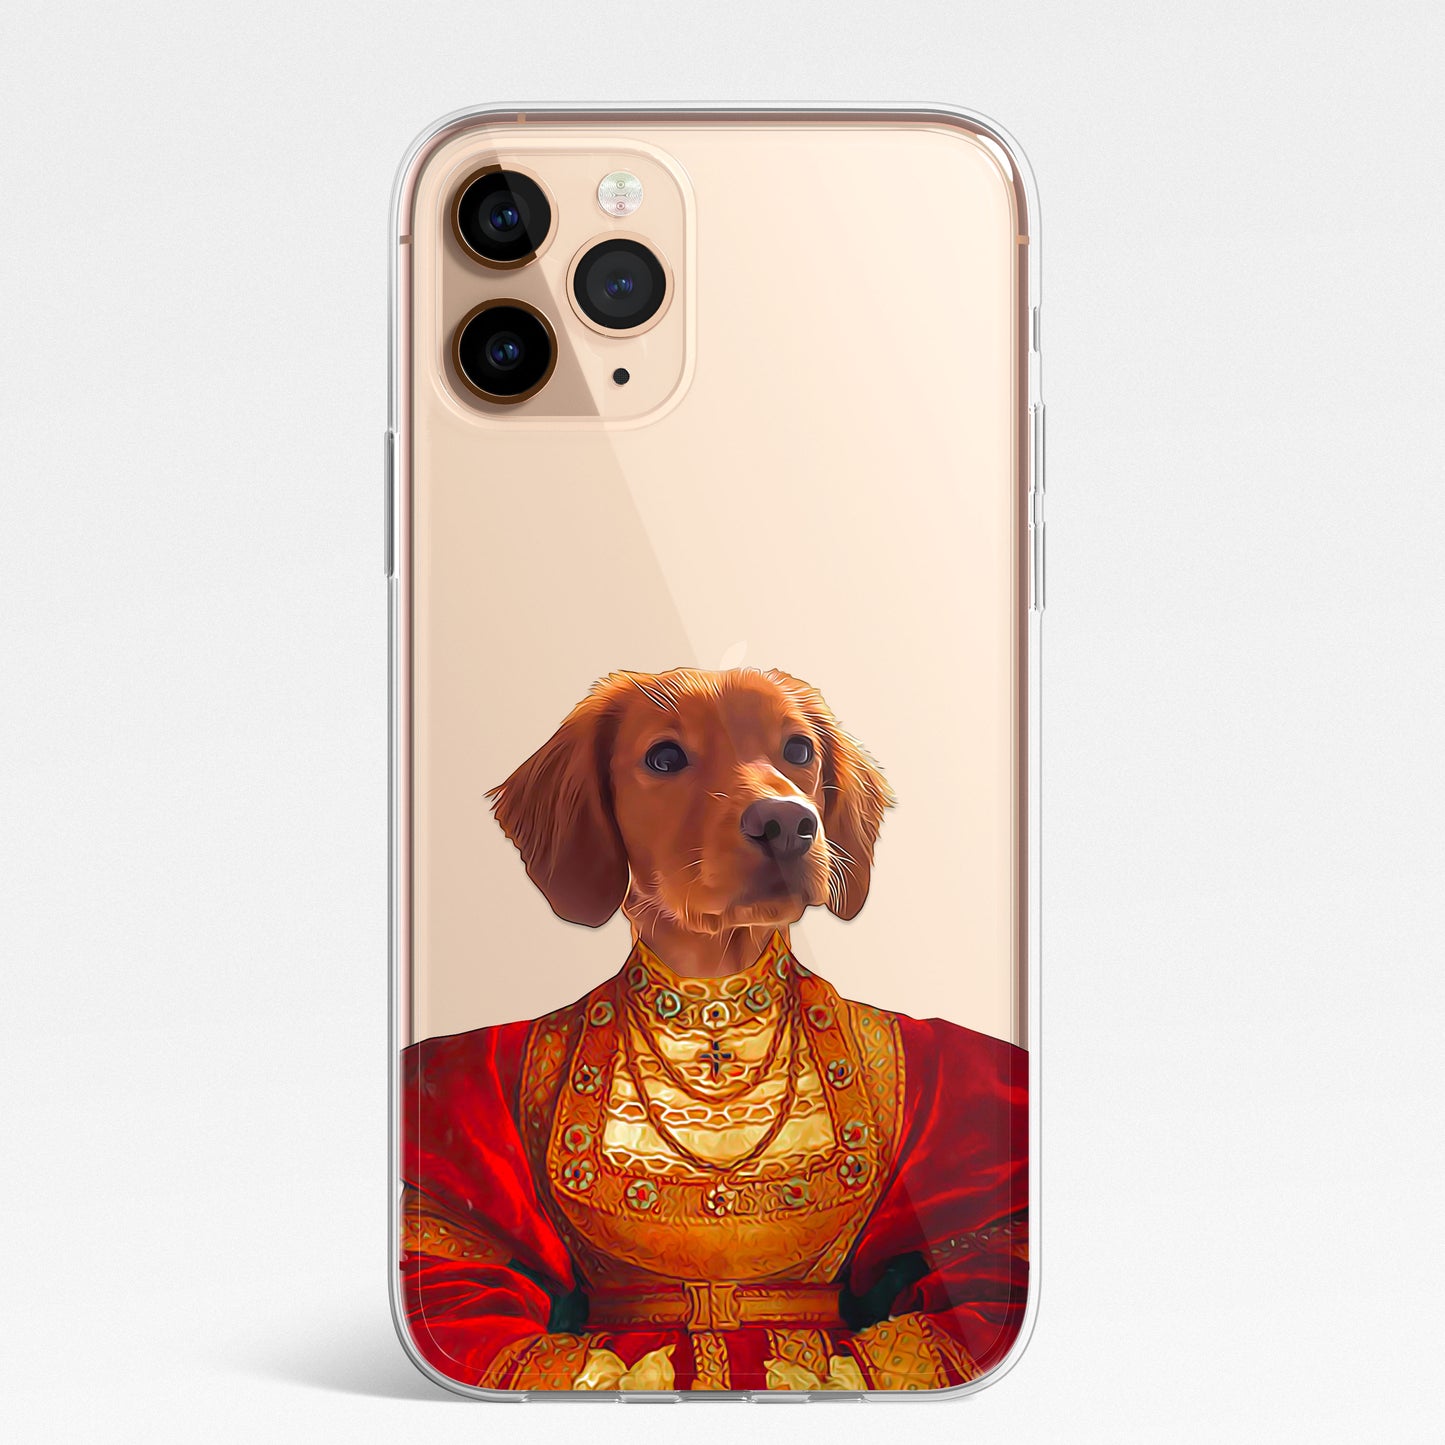 PET Portrait Royal Queen King Princess Custom CLEAR Phone Cover Case for iPhone